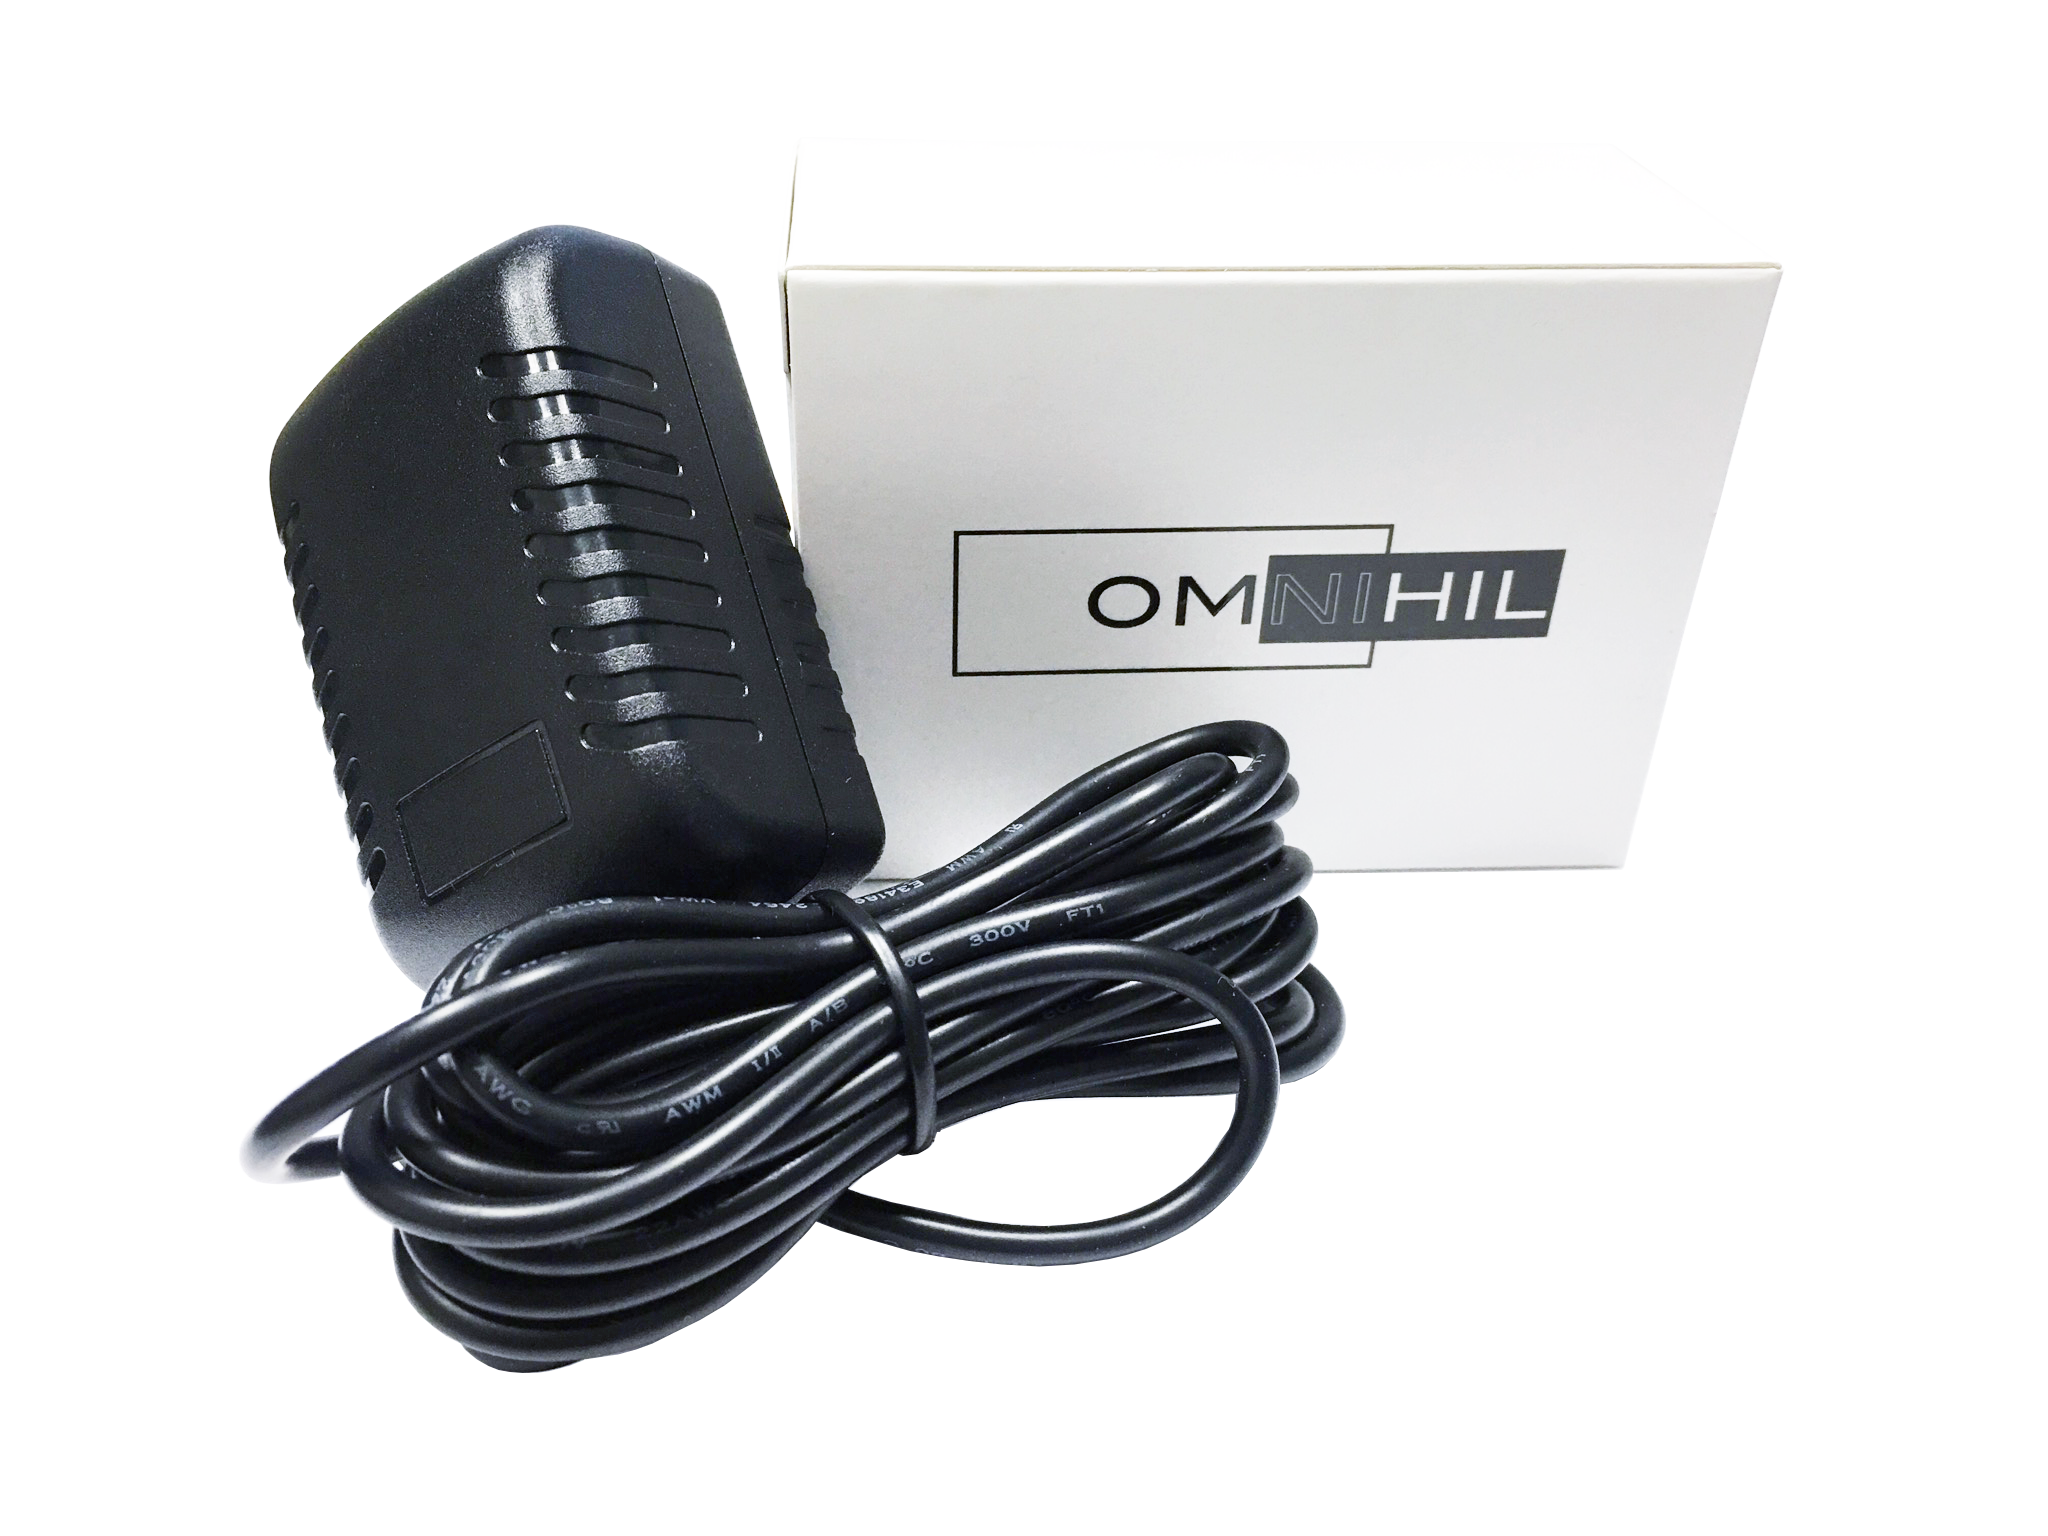 OMNIHIL AC/DC Adapter/Adaptor for Tascam US-16x08 16x8 USB Audio/MIDI Interface Power Supply Cord Cable PS Wall Home Charger - image 1 of 4